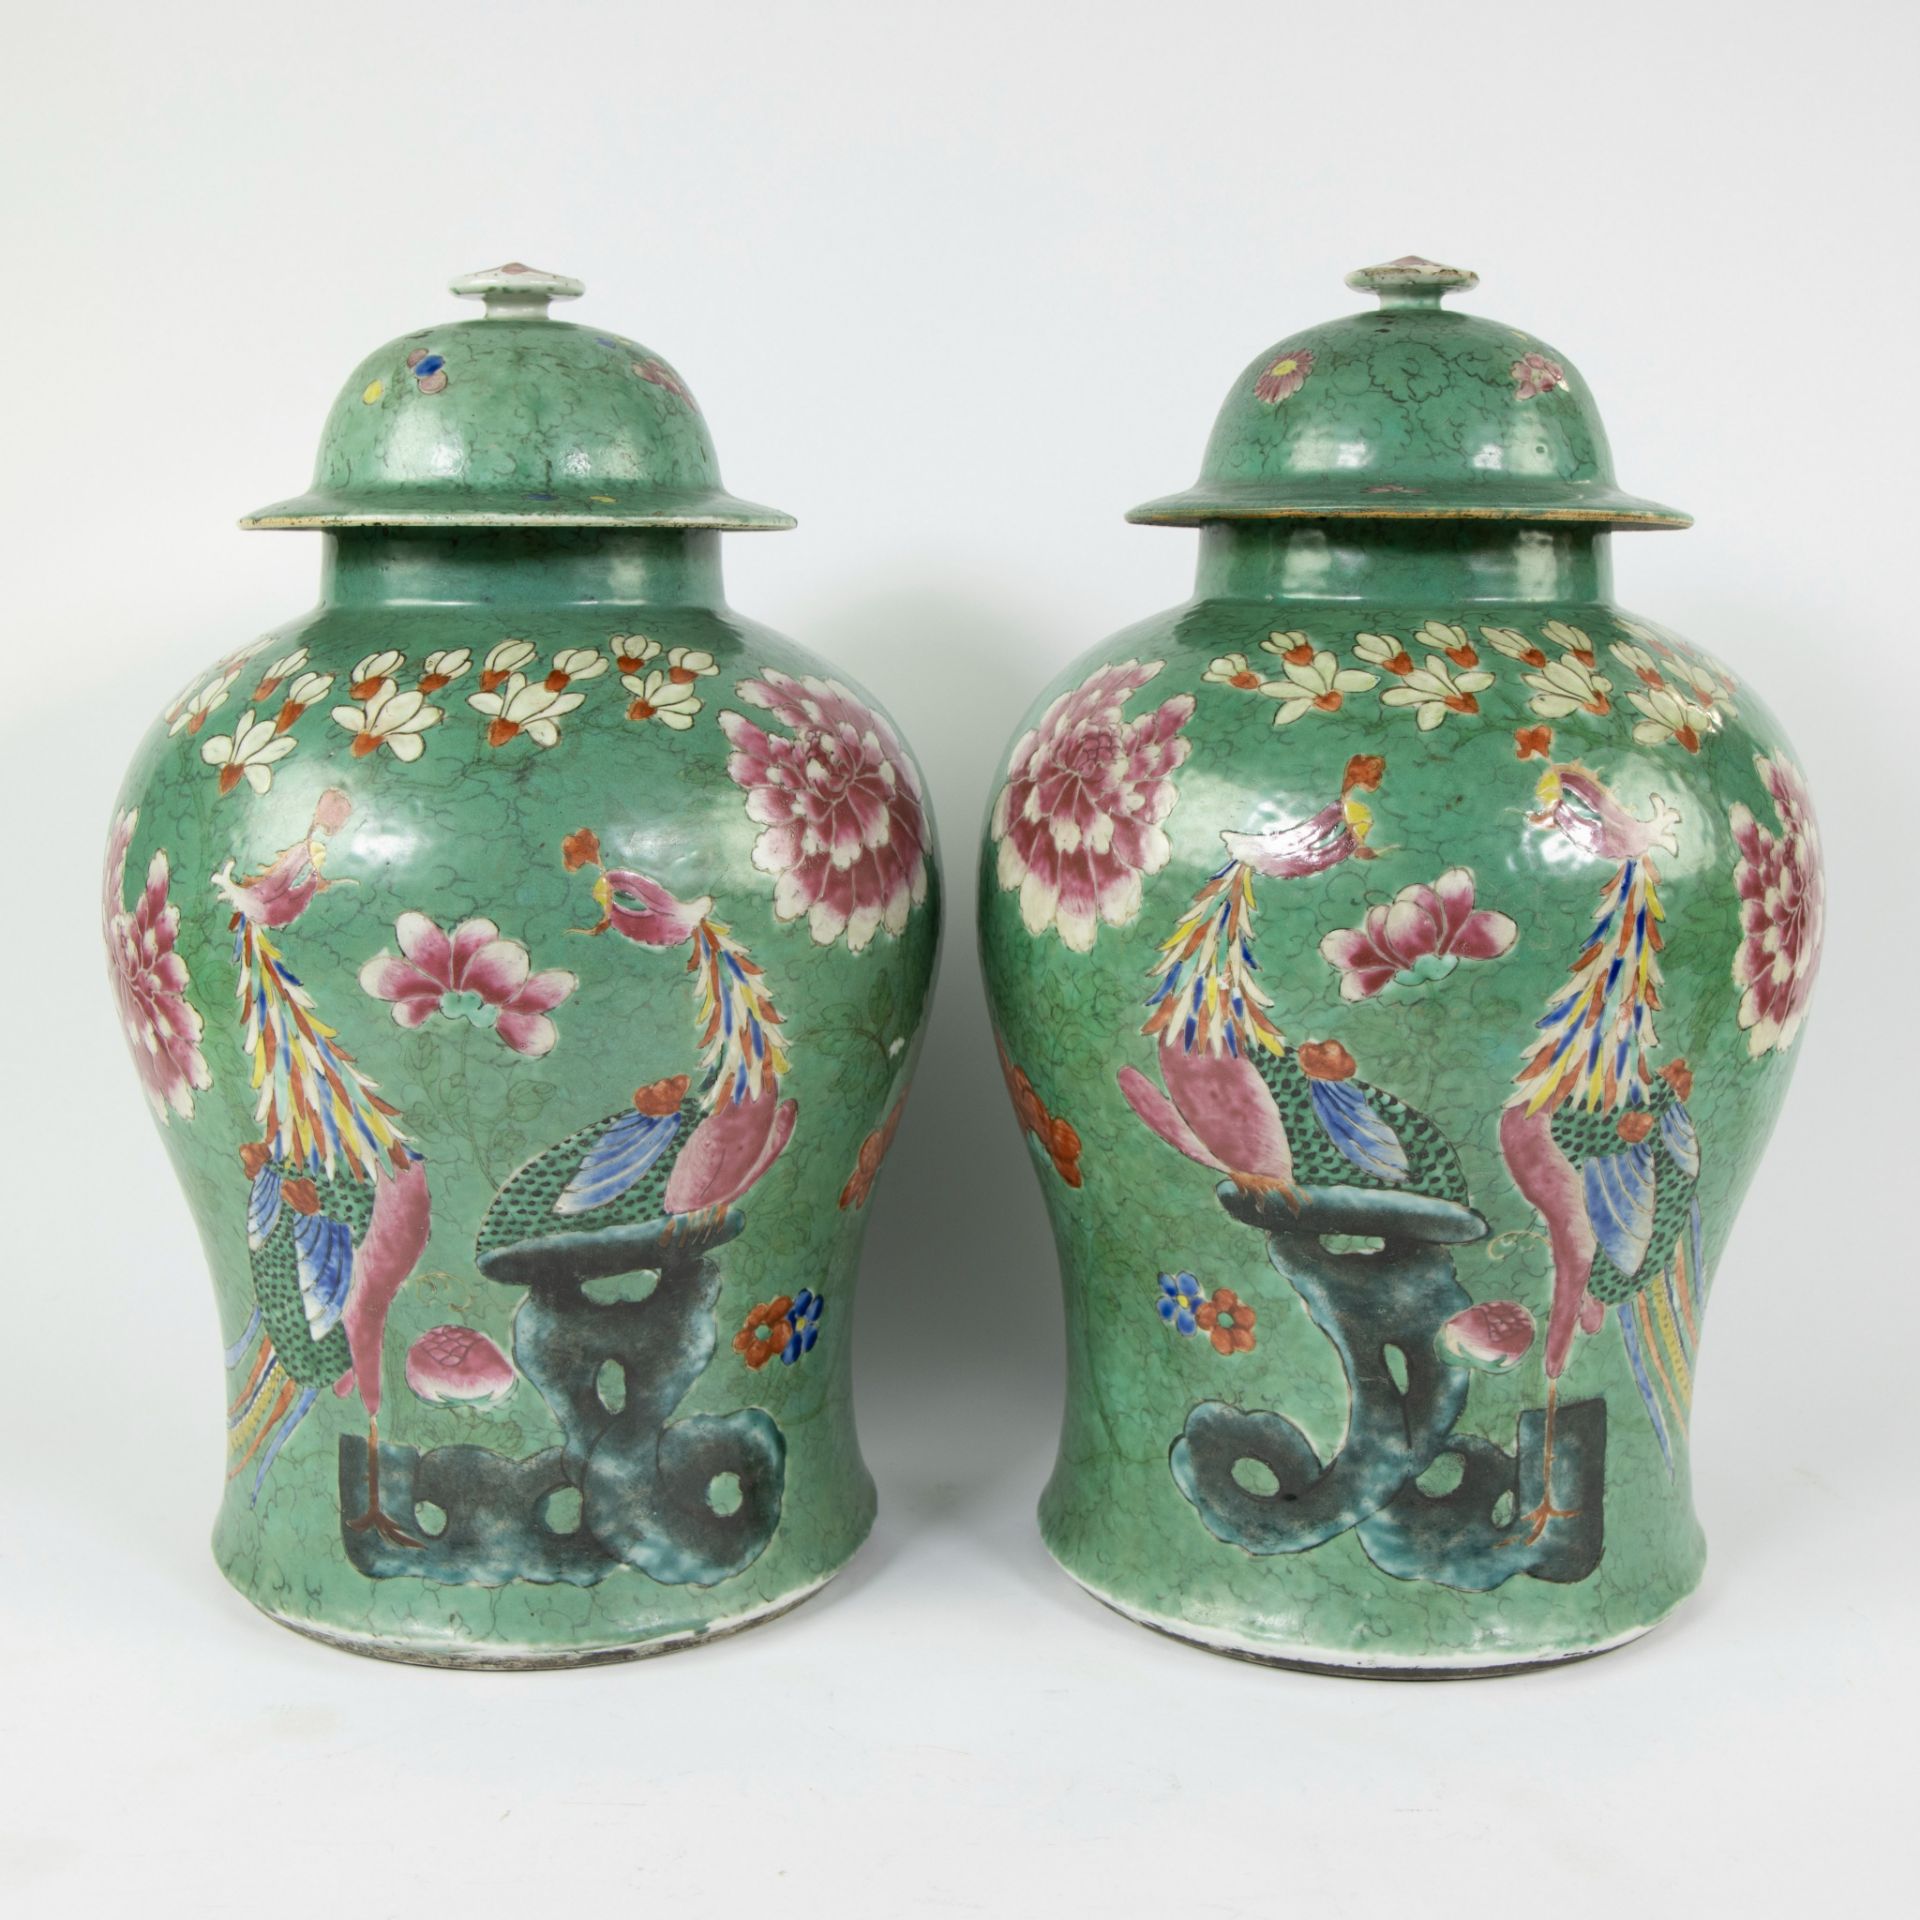 Pair of Chinese baluster shaped jars and their covers symmetrically decorated in fencai enamels depi